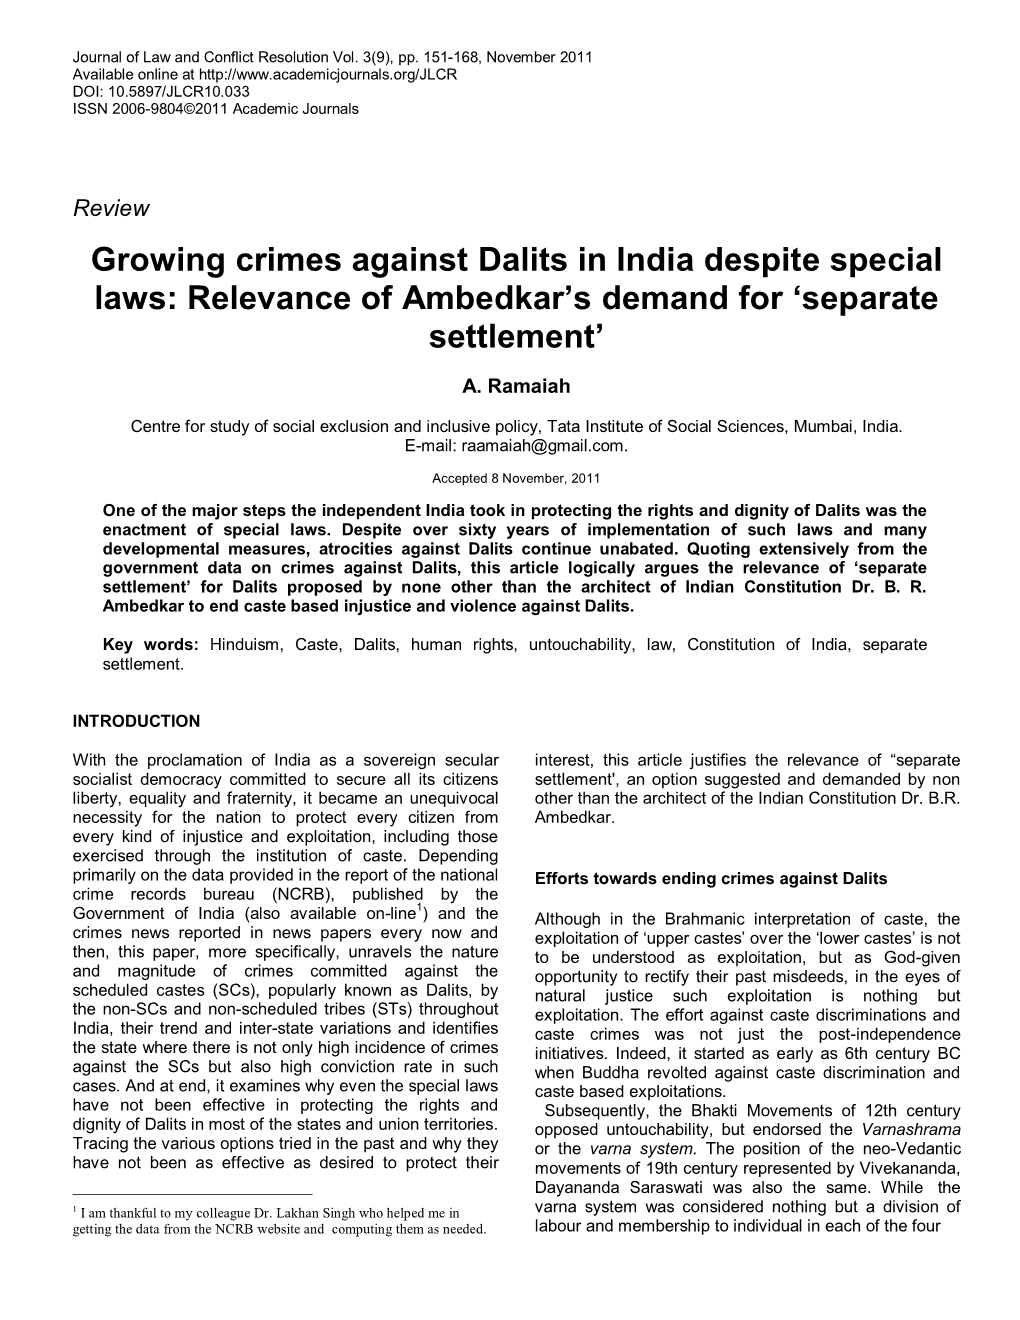 Growing Crimes Against Dalits in India Despite Special Laws: Relevance of Ambedkar’S Demand for ‘Separate Settlement’